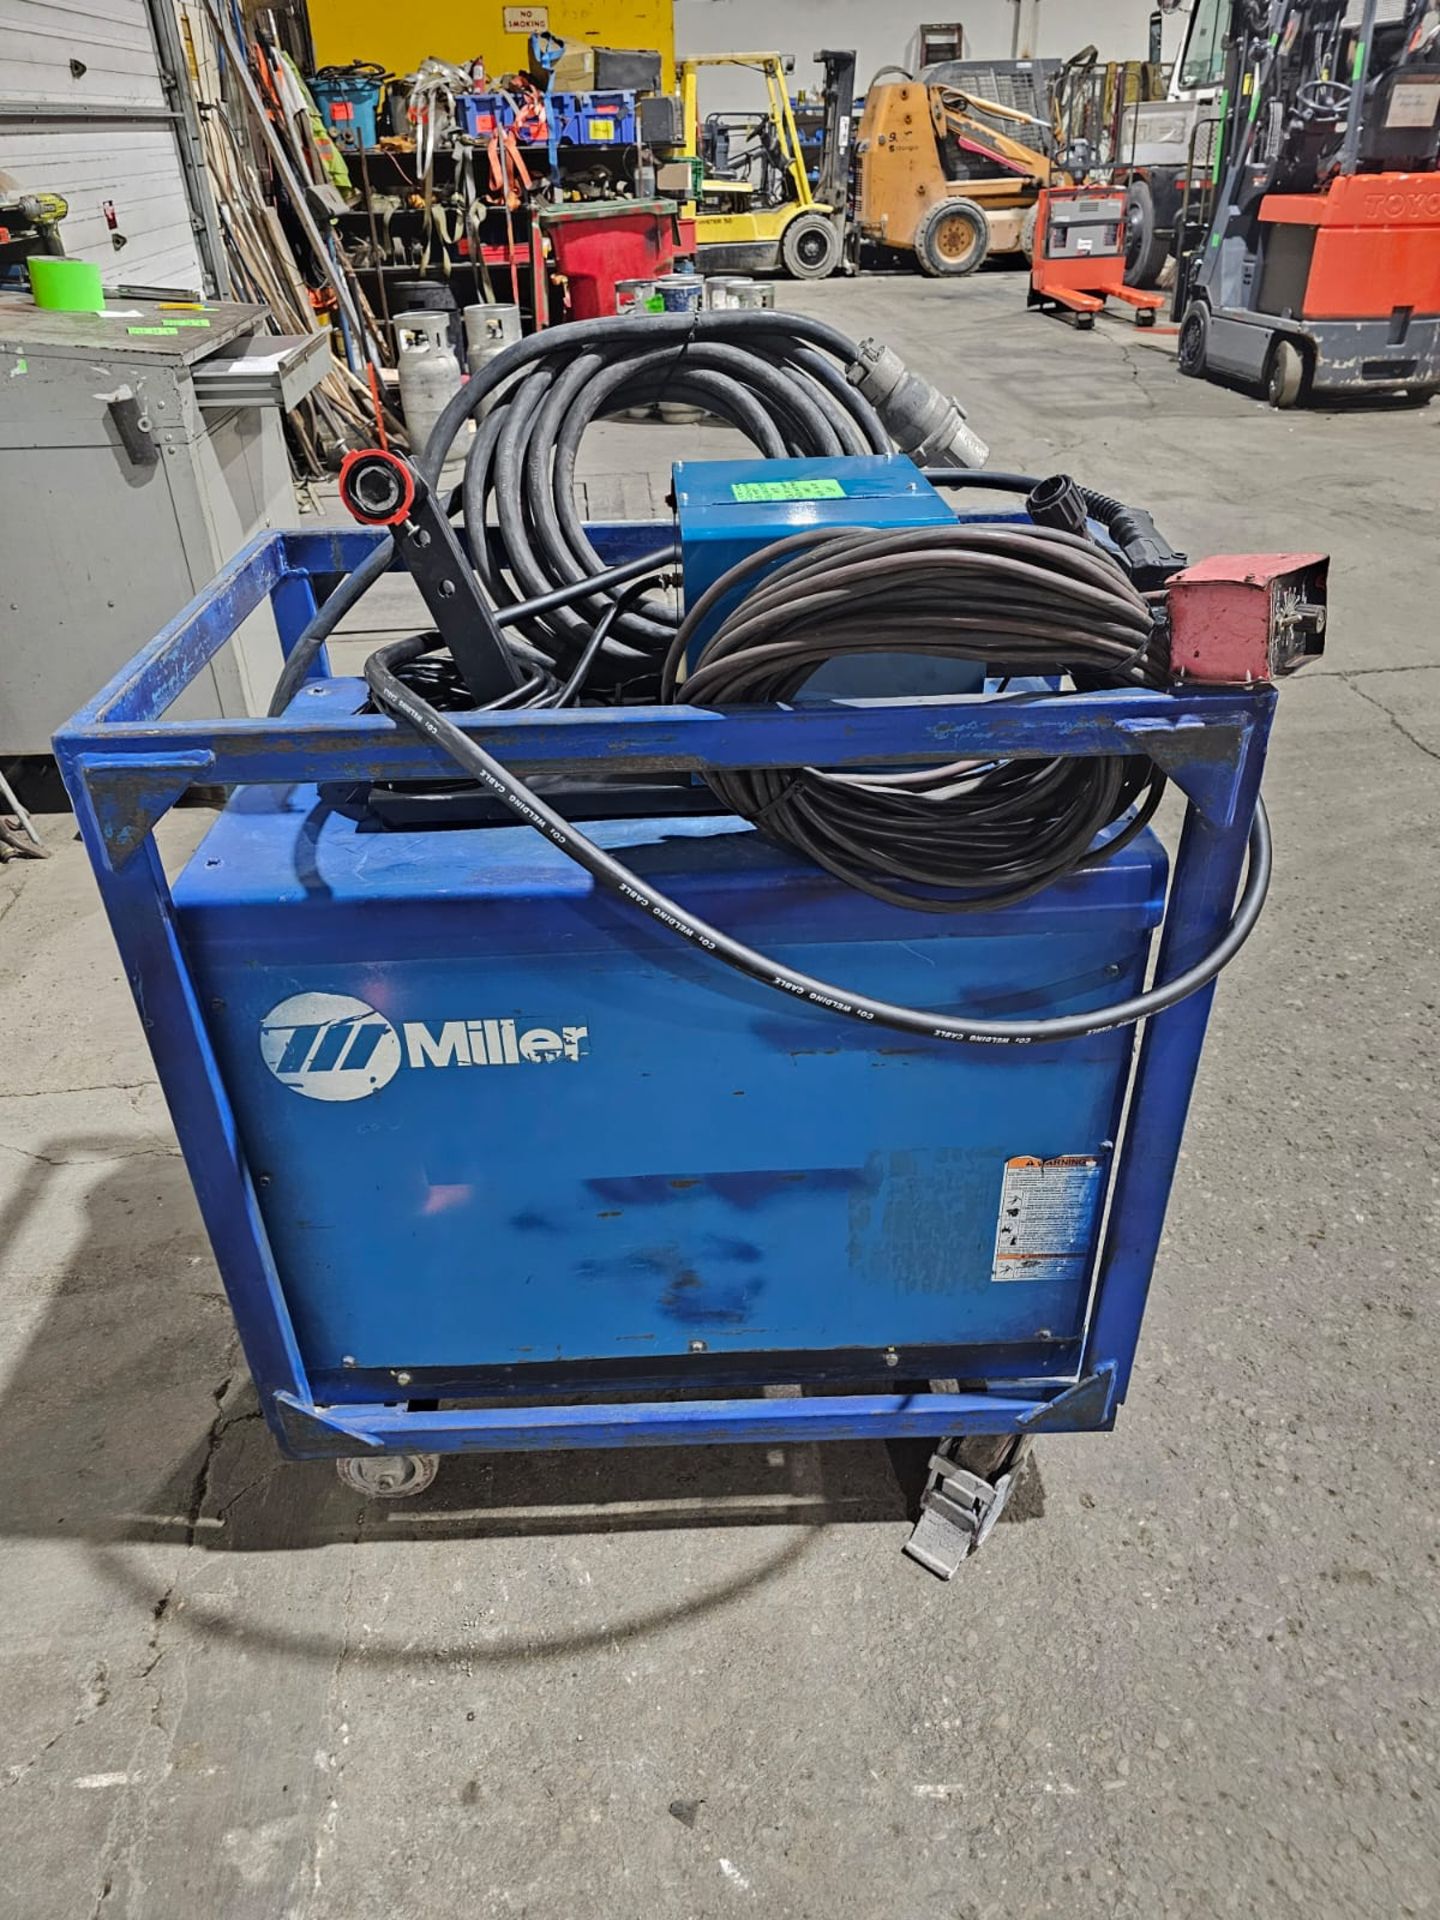 Miller Dimension 652 Mig Welder 650 Amp Mig Tig Stick Multi Process Power Source with 22A Wire - Image 2 of 7